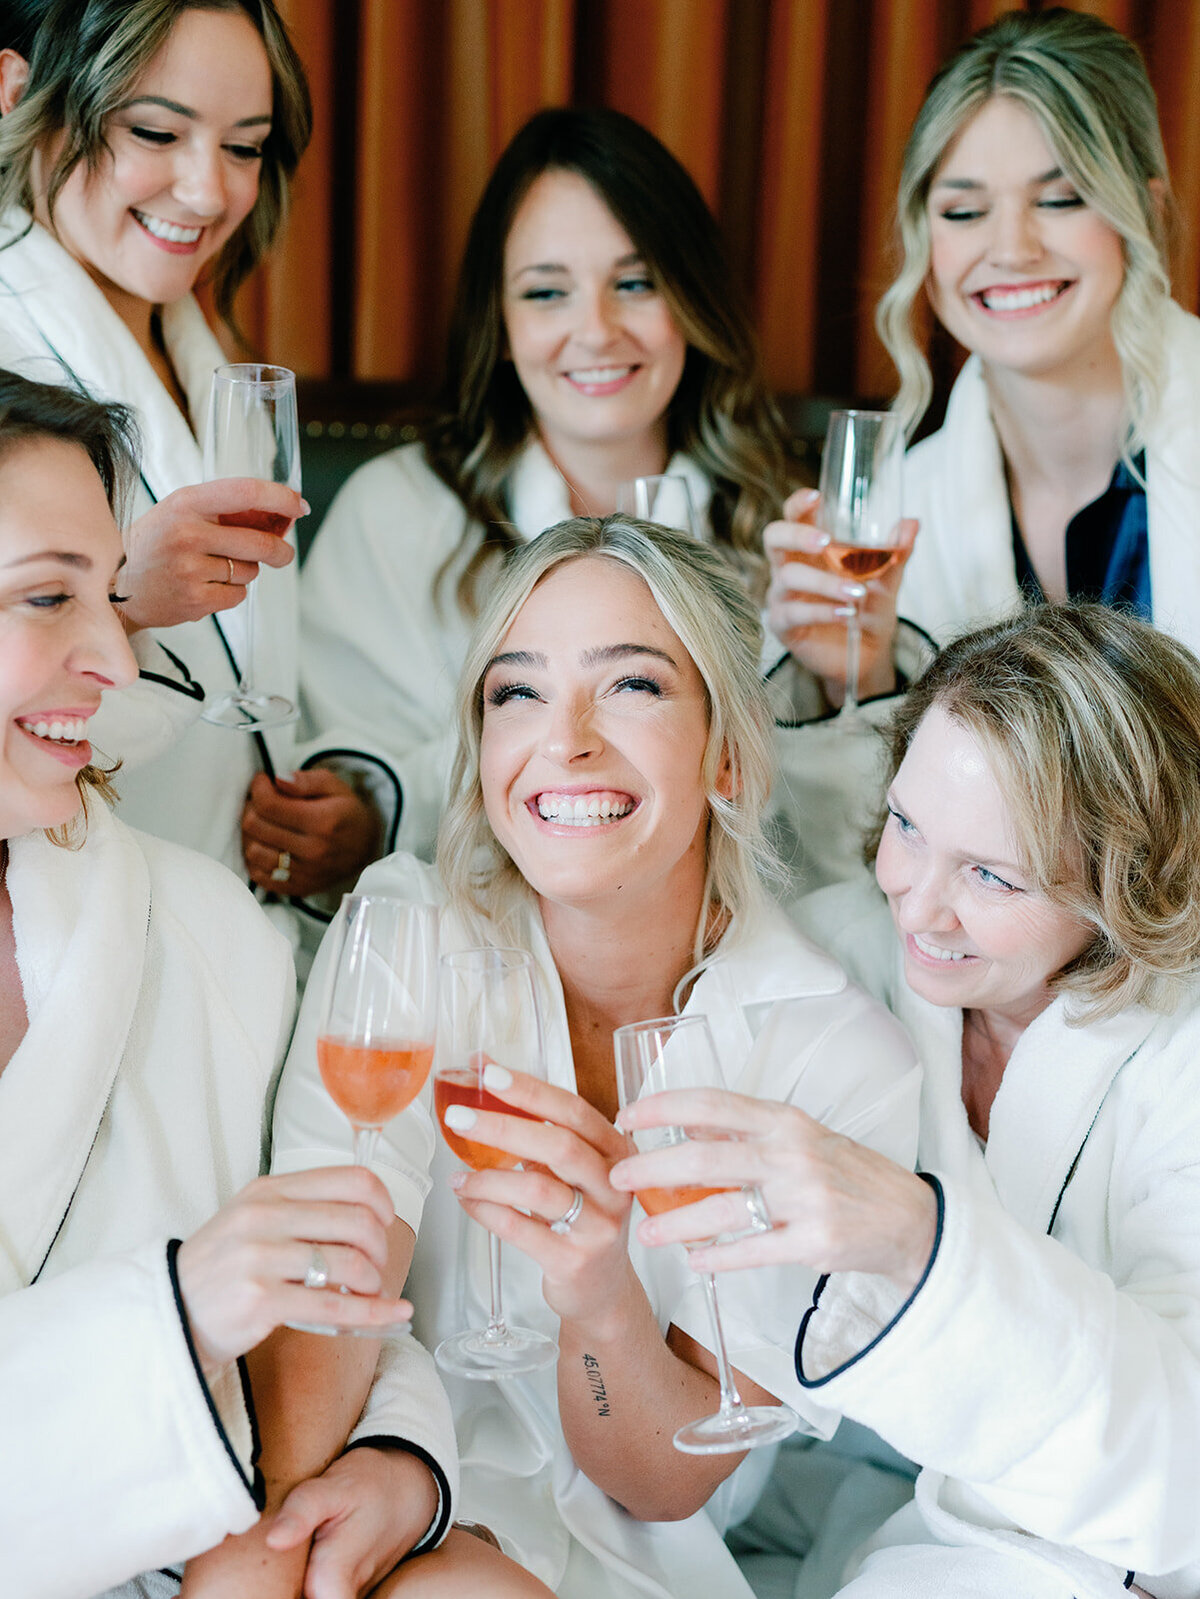 Bride elated as she is surrounded by her bridesmaids cheering with champagne